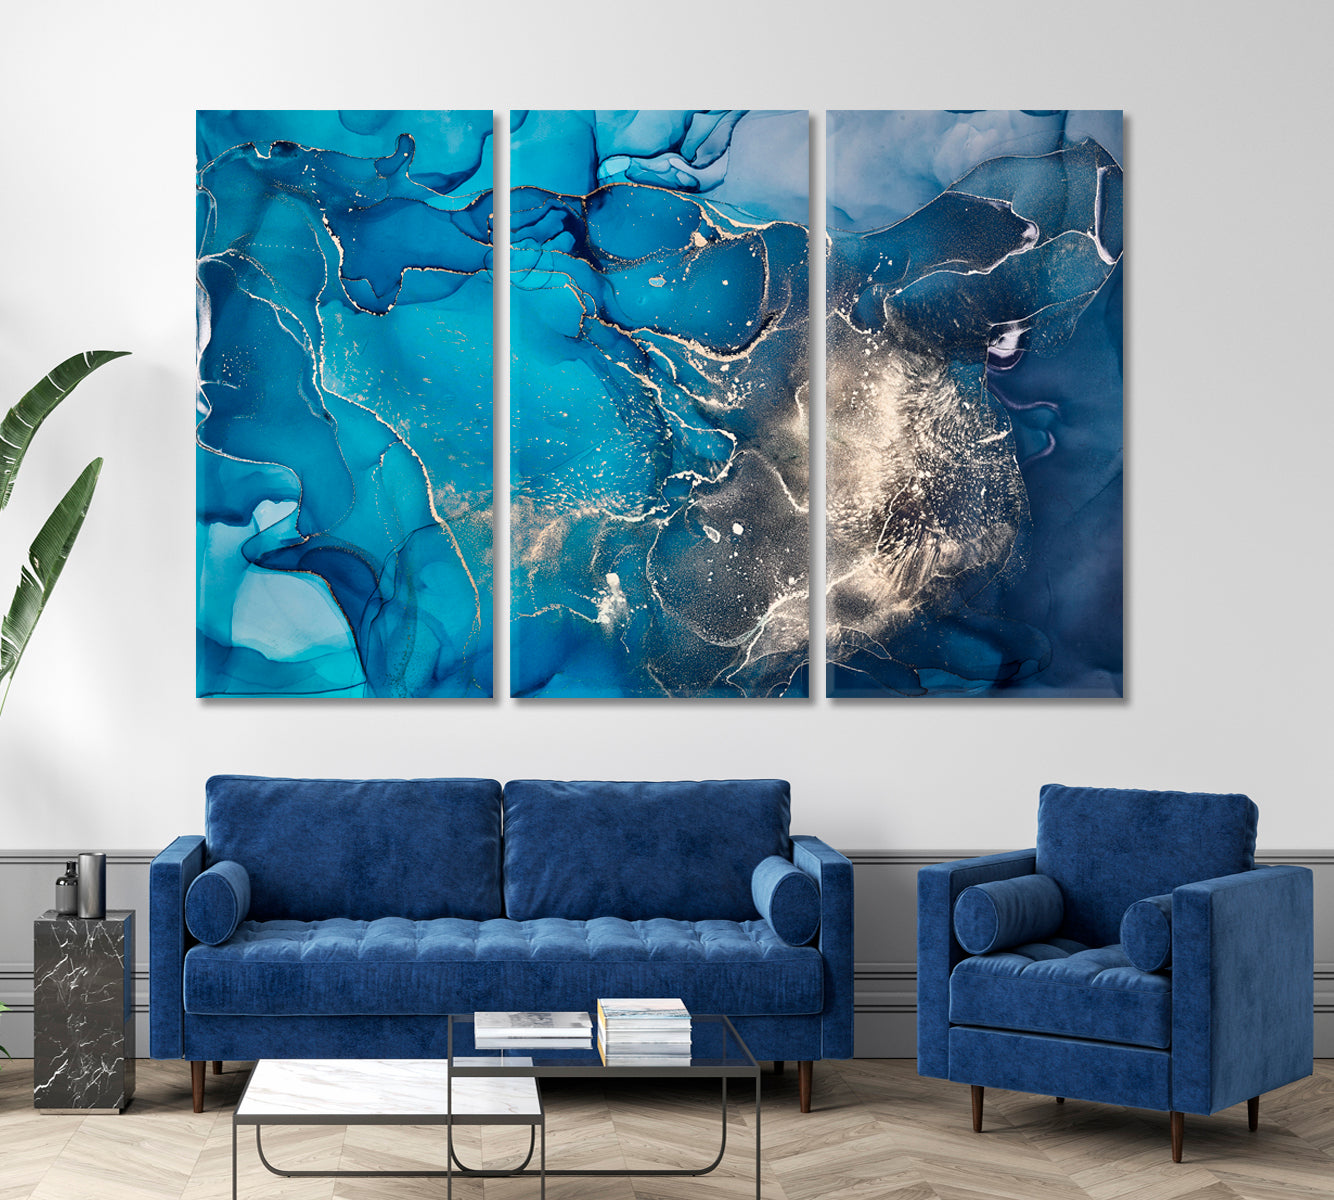 BLUE SKY Abstract Design Ink Colors Translucent Marble Fluid Art, Oriental Marbling Canvas Print Artesty 3 panels 36" x 24" 